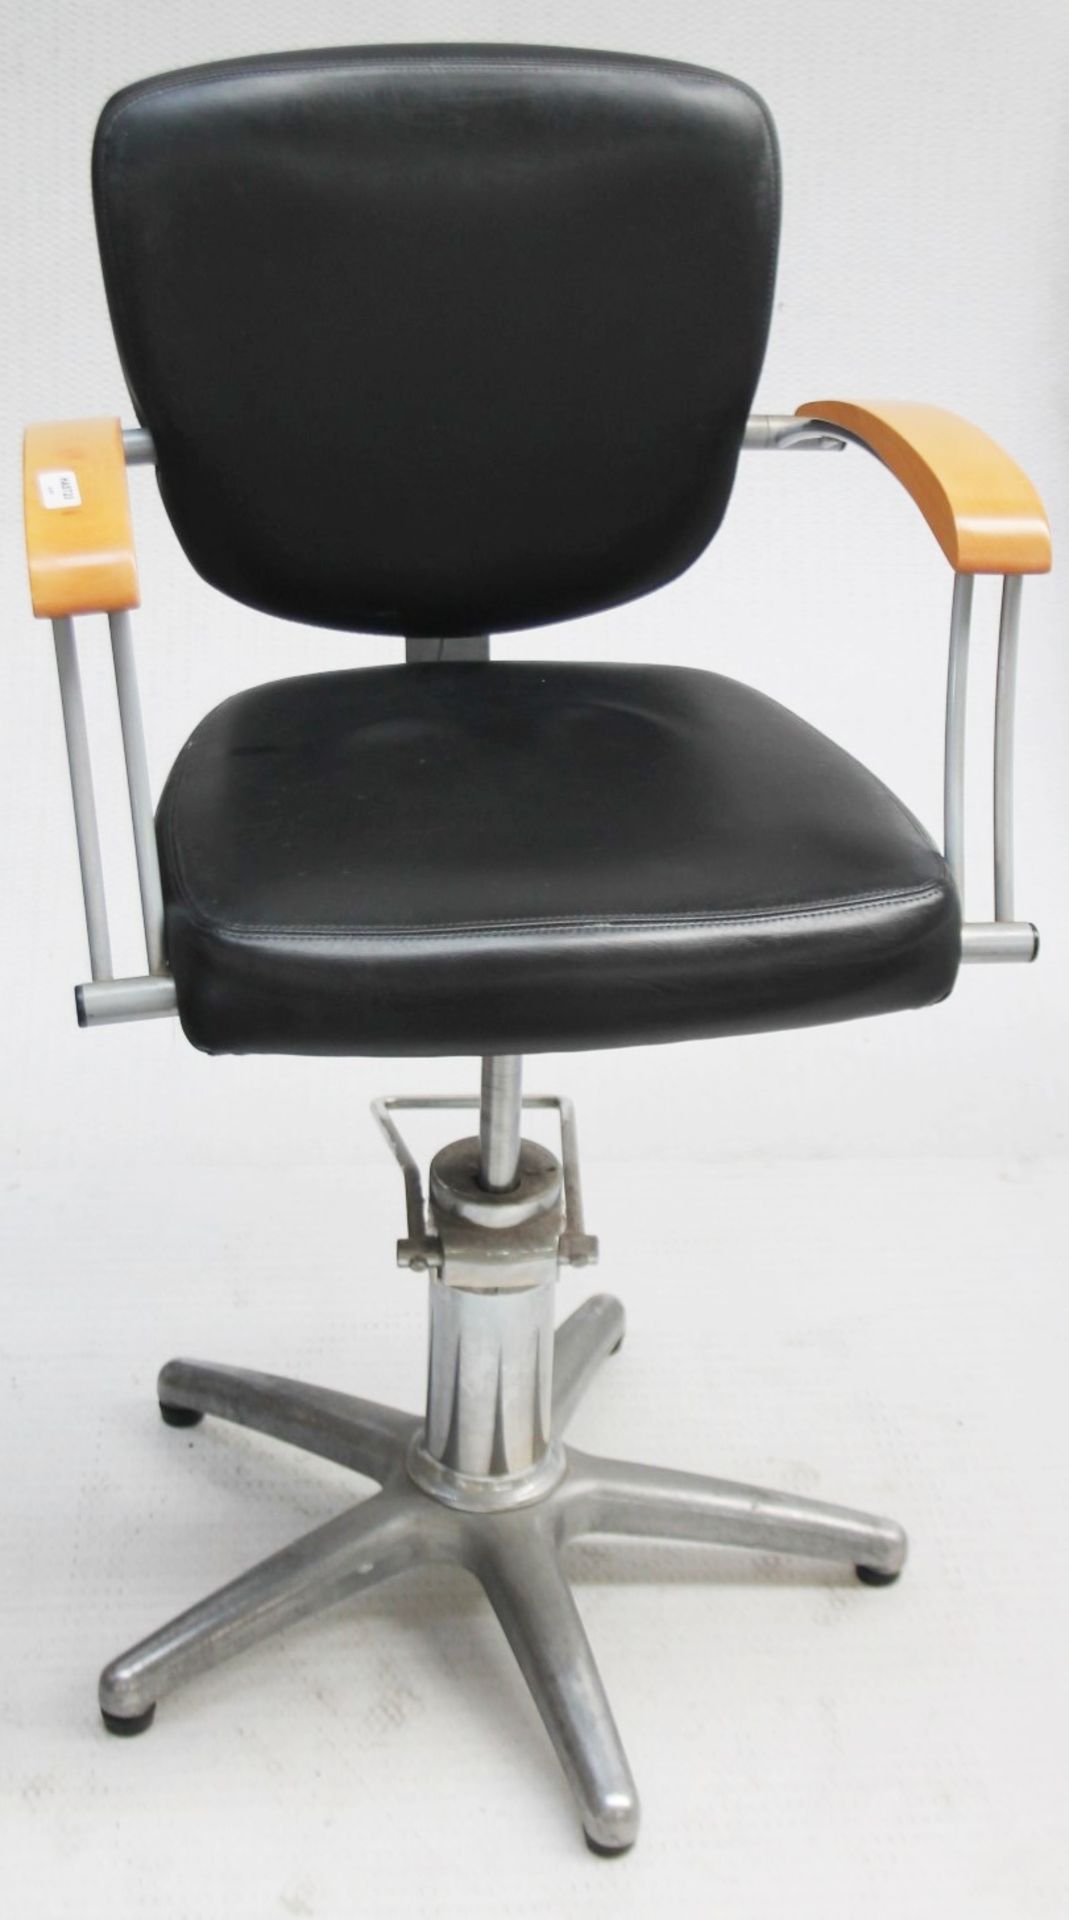 1 x Adjustable Black Hydraulic Barber Hairdressing Chair - Recently Removed From A Boutique Hair - Image 4 of 10